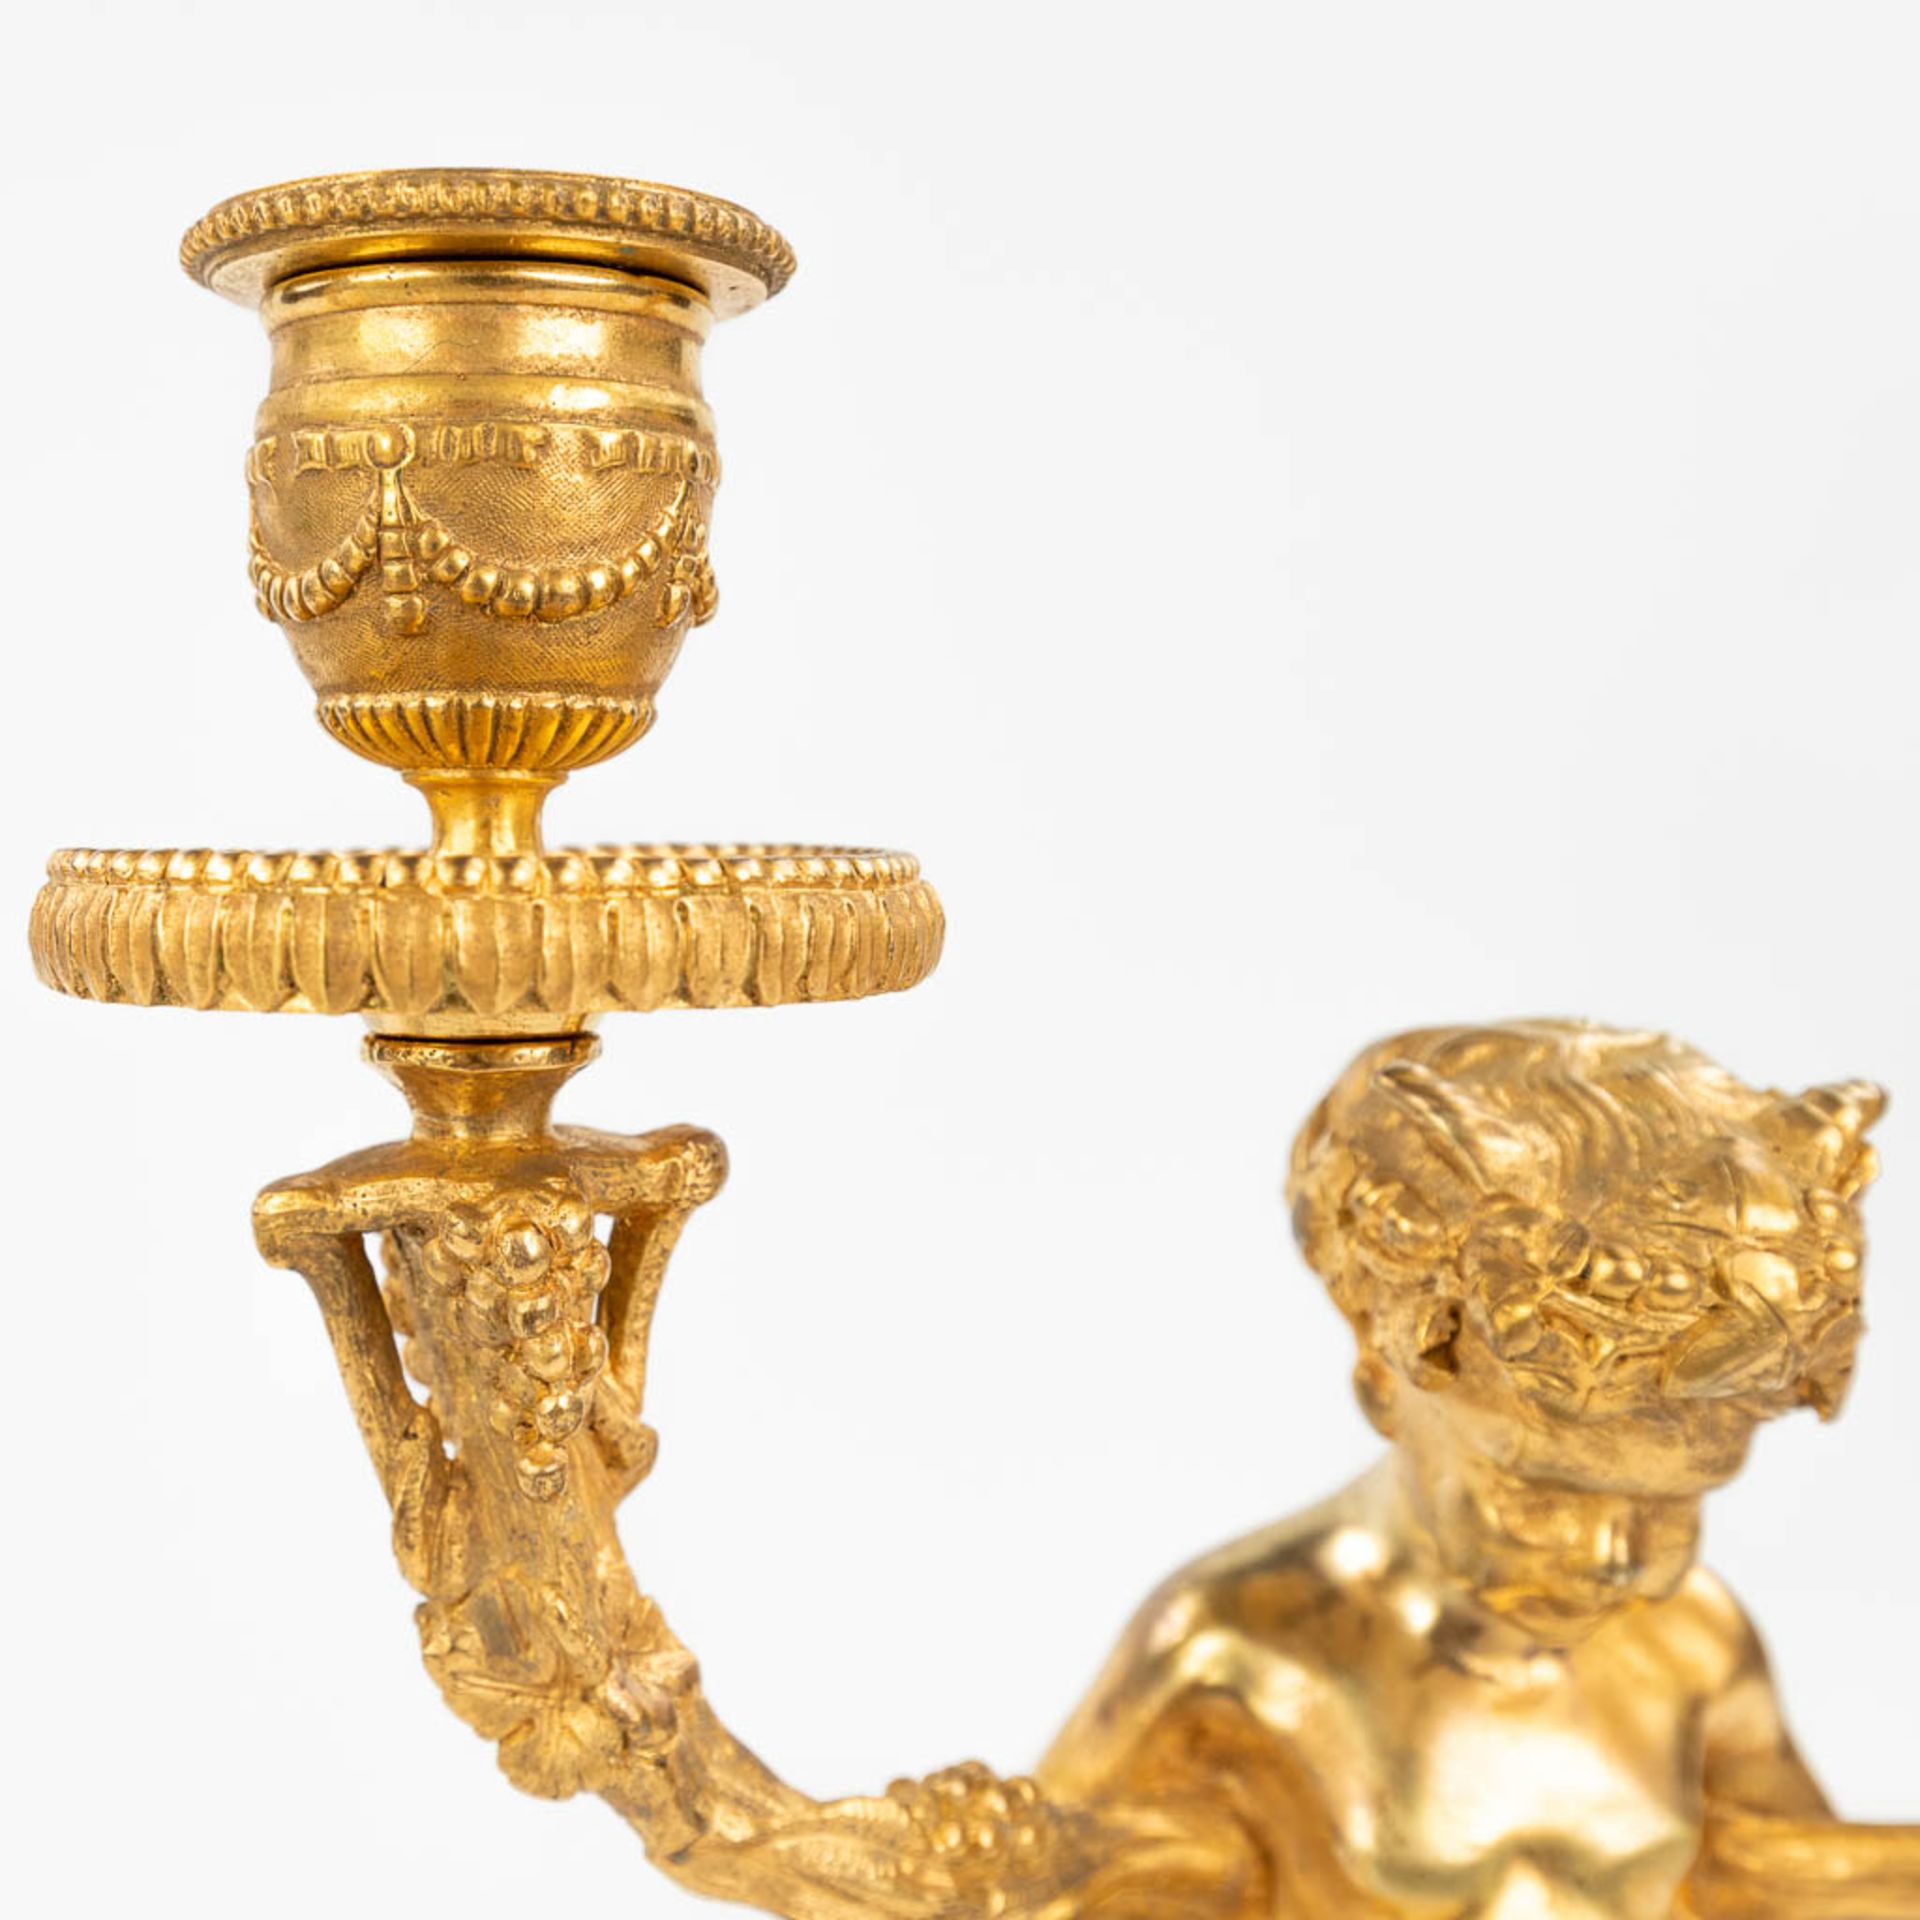 A pair of candelabra with Satyr figurines, made of gold-plated bronze. (13 x 21 x 30,5cm) - Bild 8 aus 13